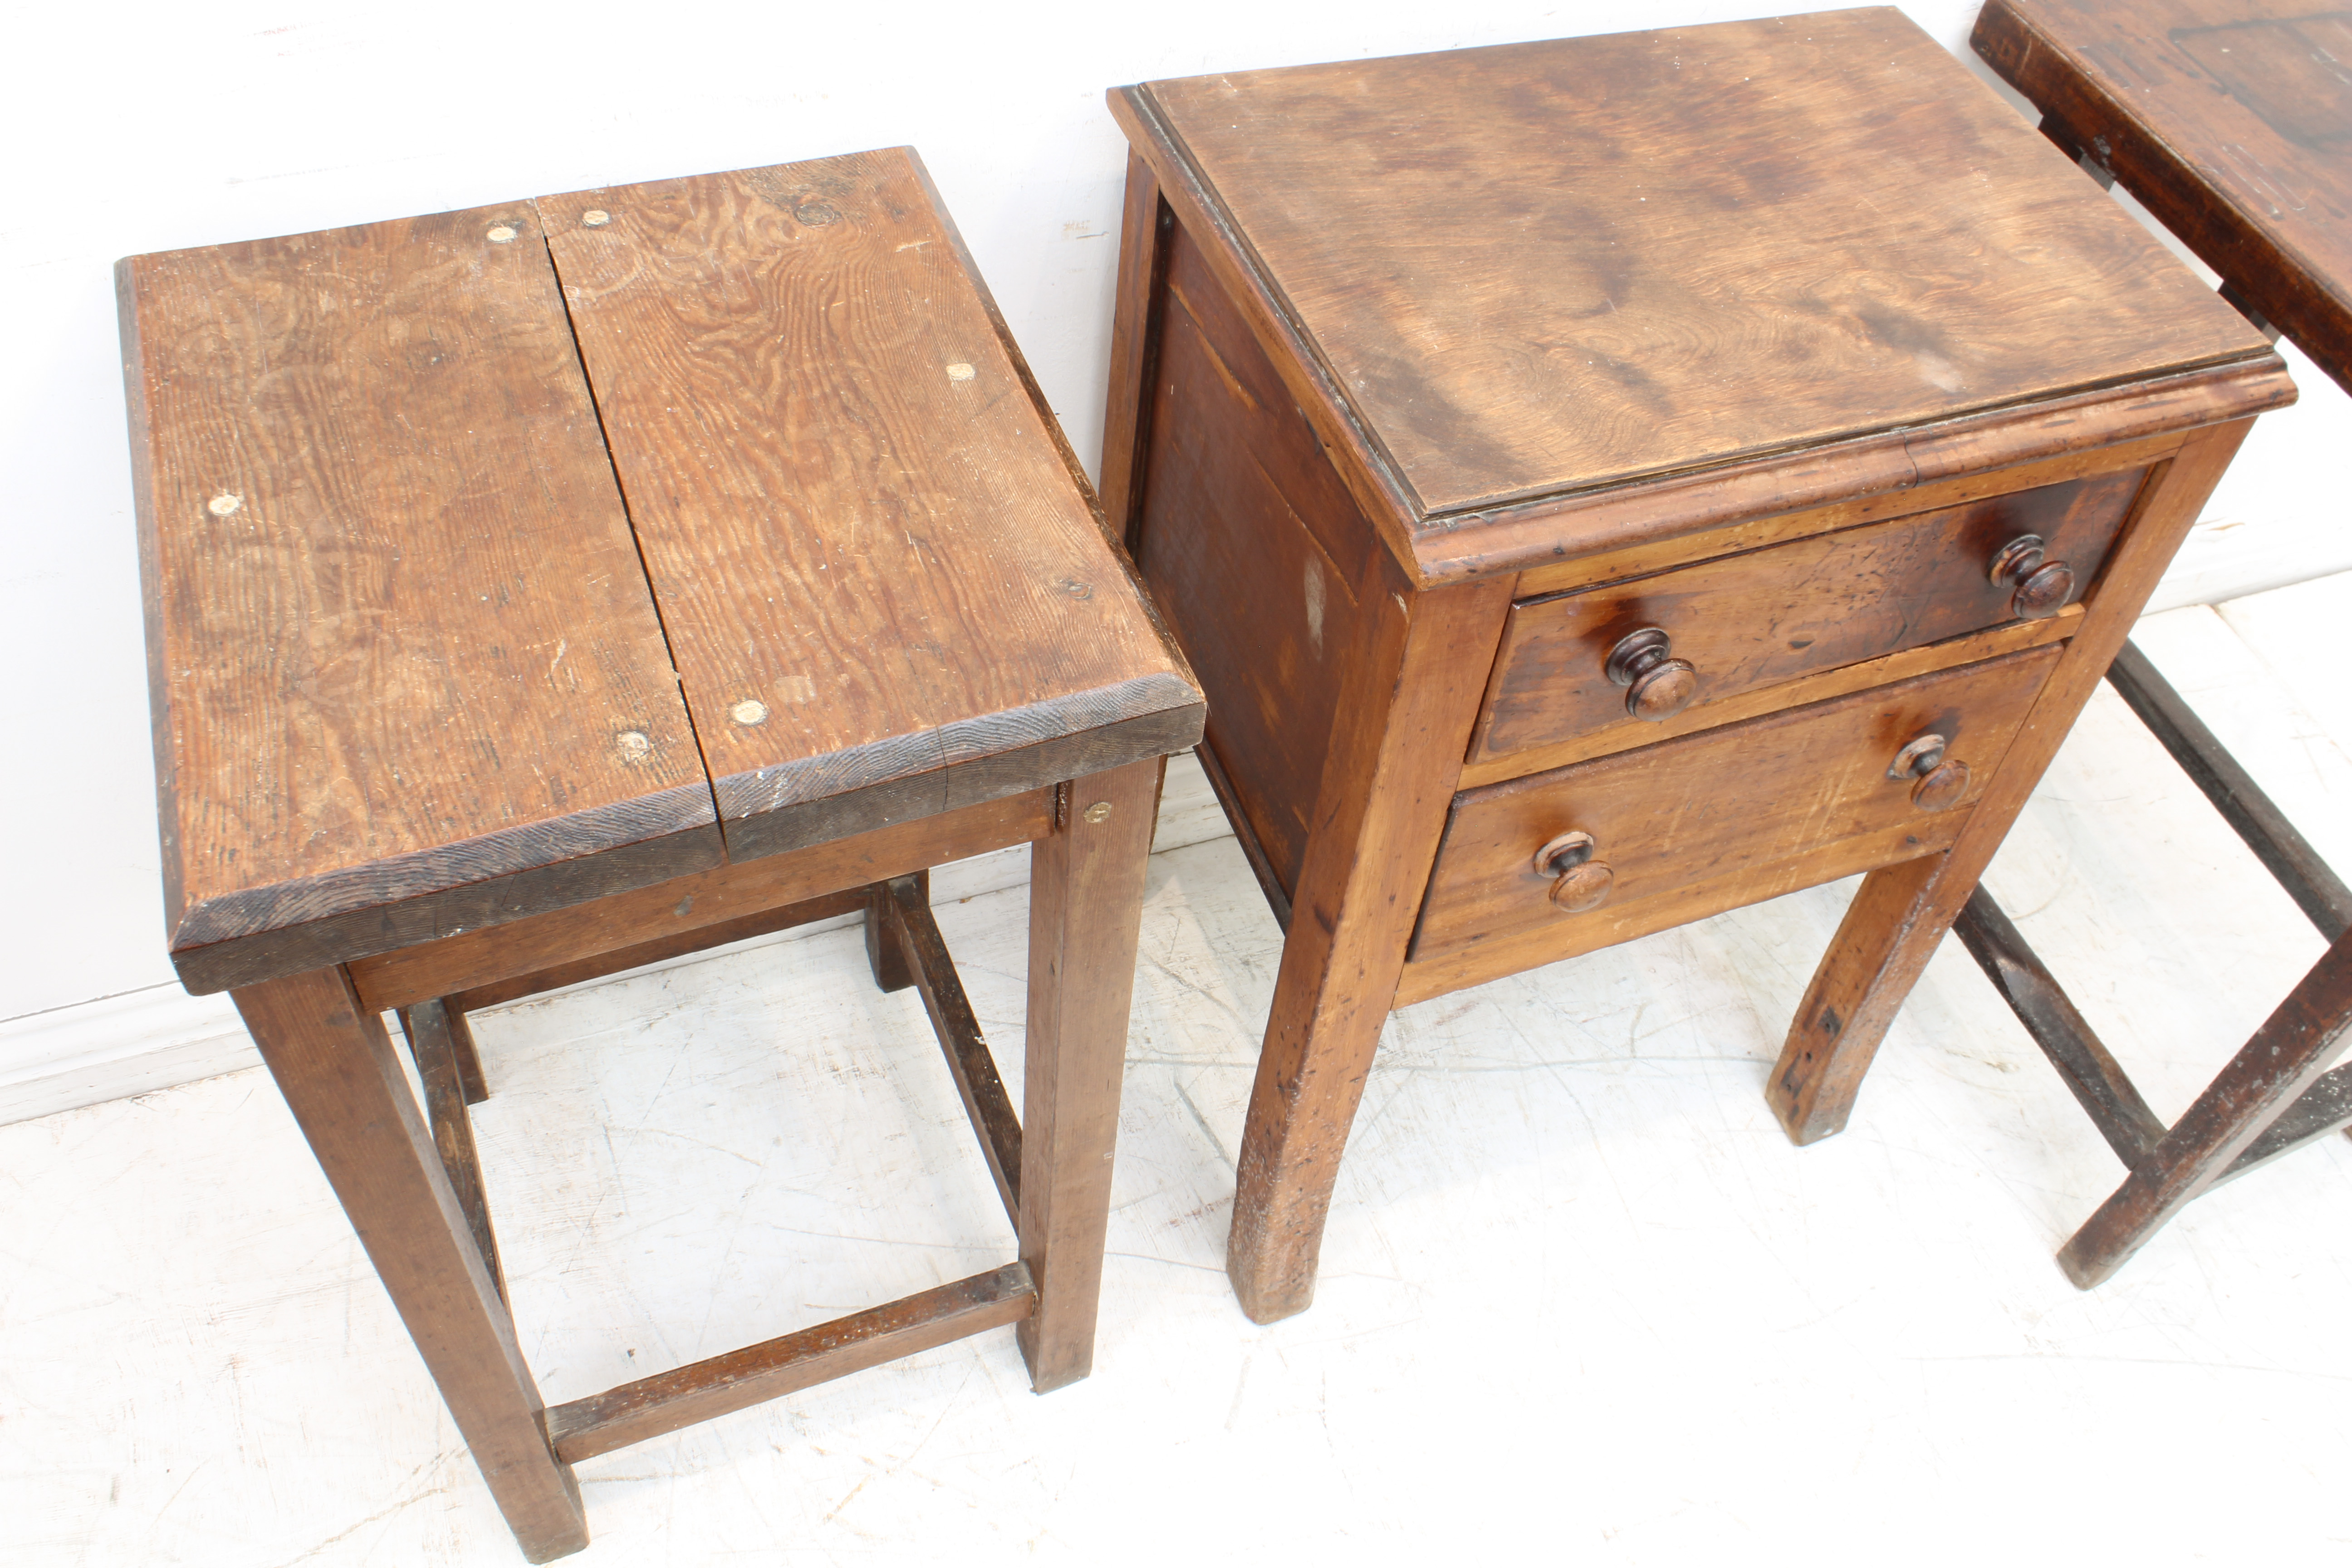 A group of three: - an early 19th century George III period mahogany topped rectangular occasional - Image 2 of 3